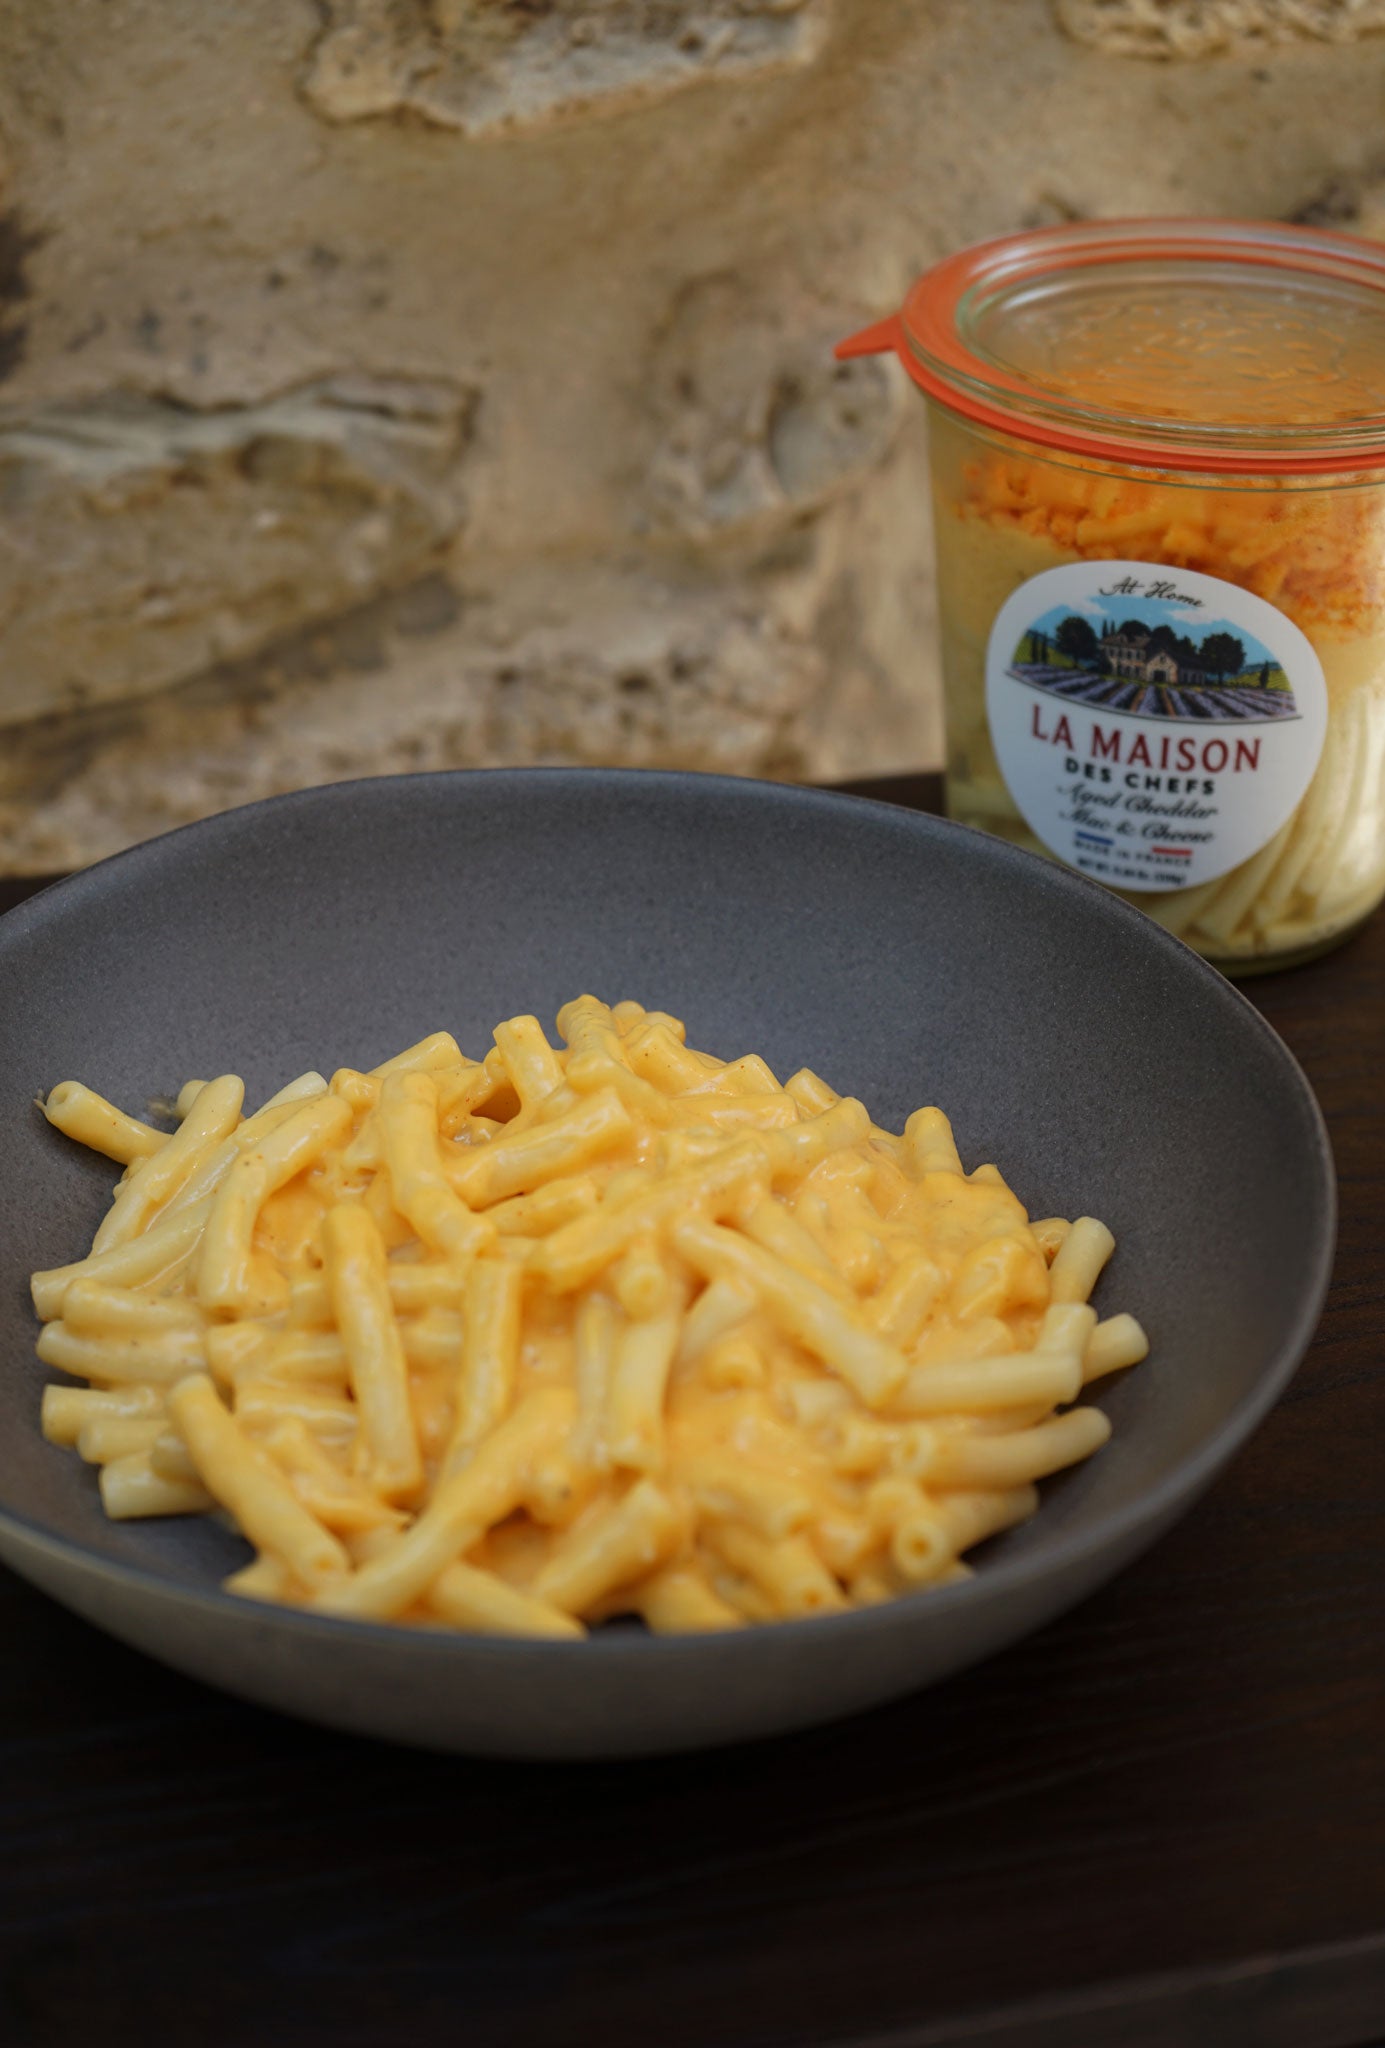 Aged Cheddar Mac & Cheese product and dish